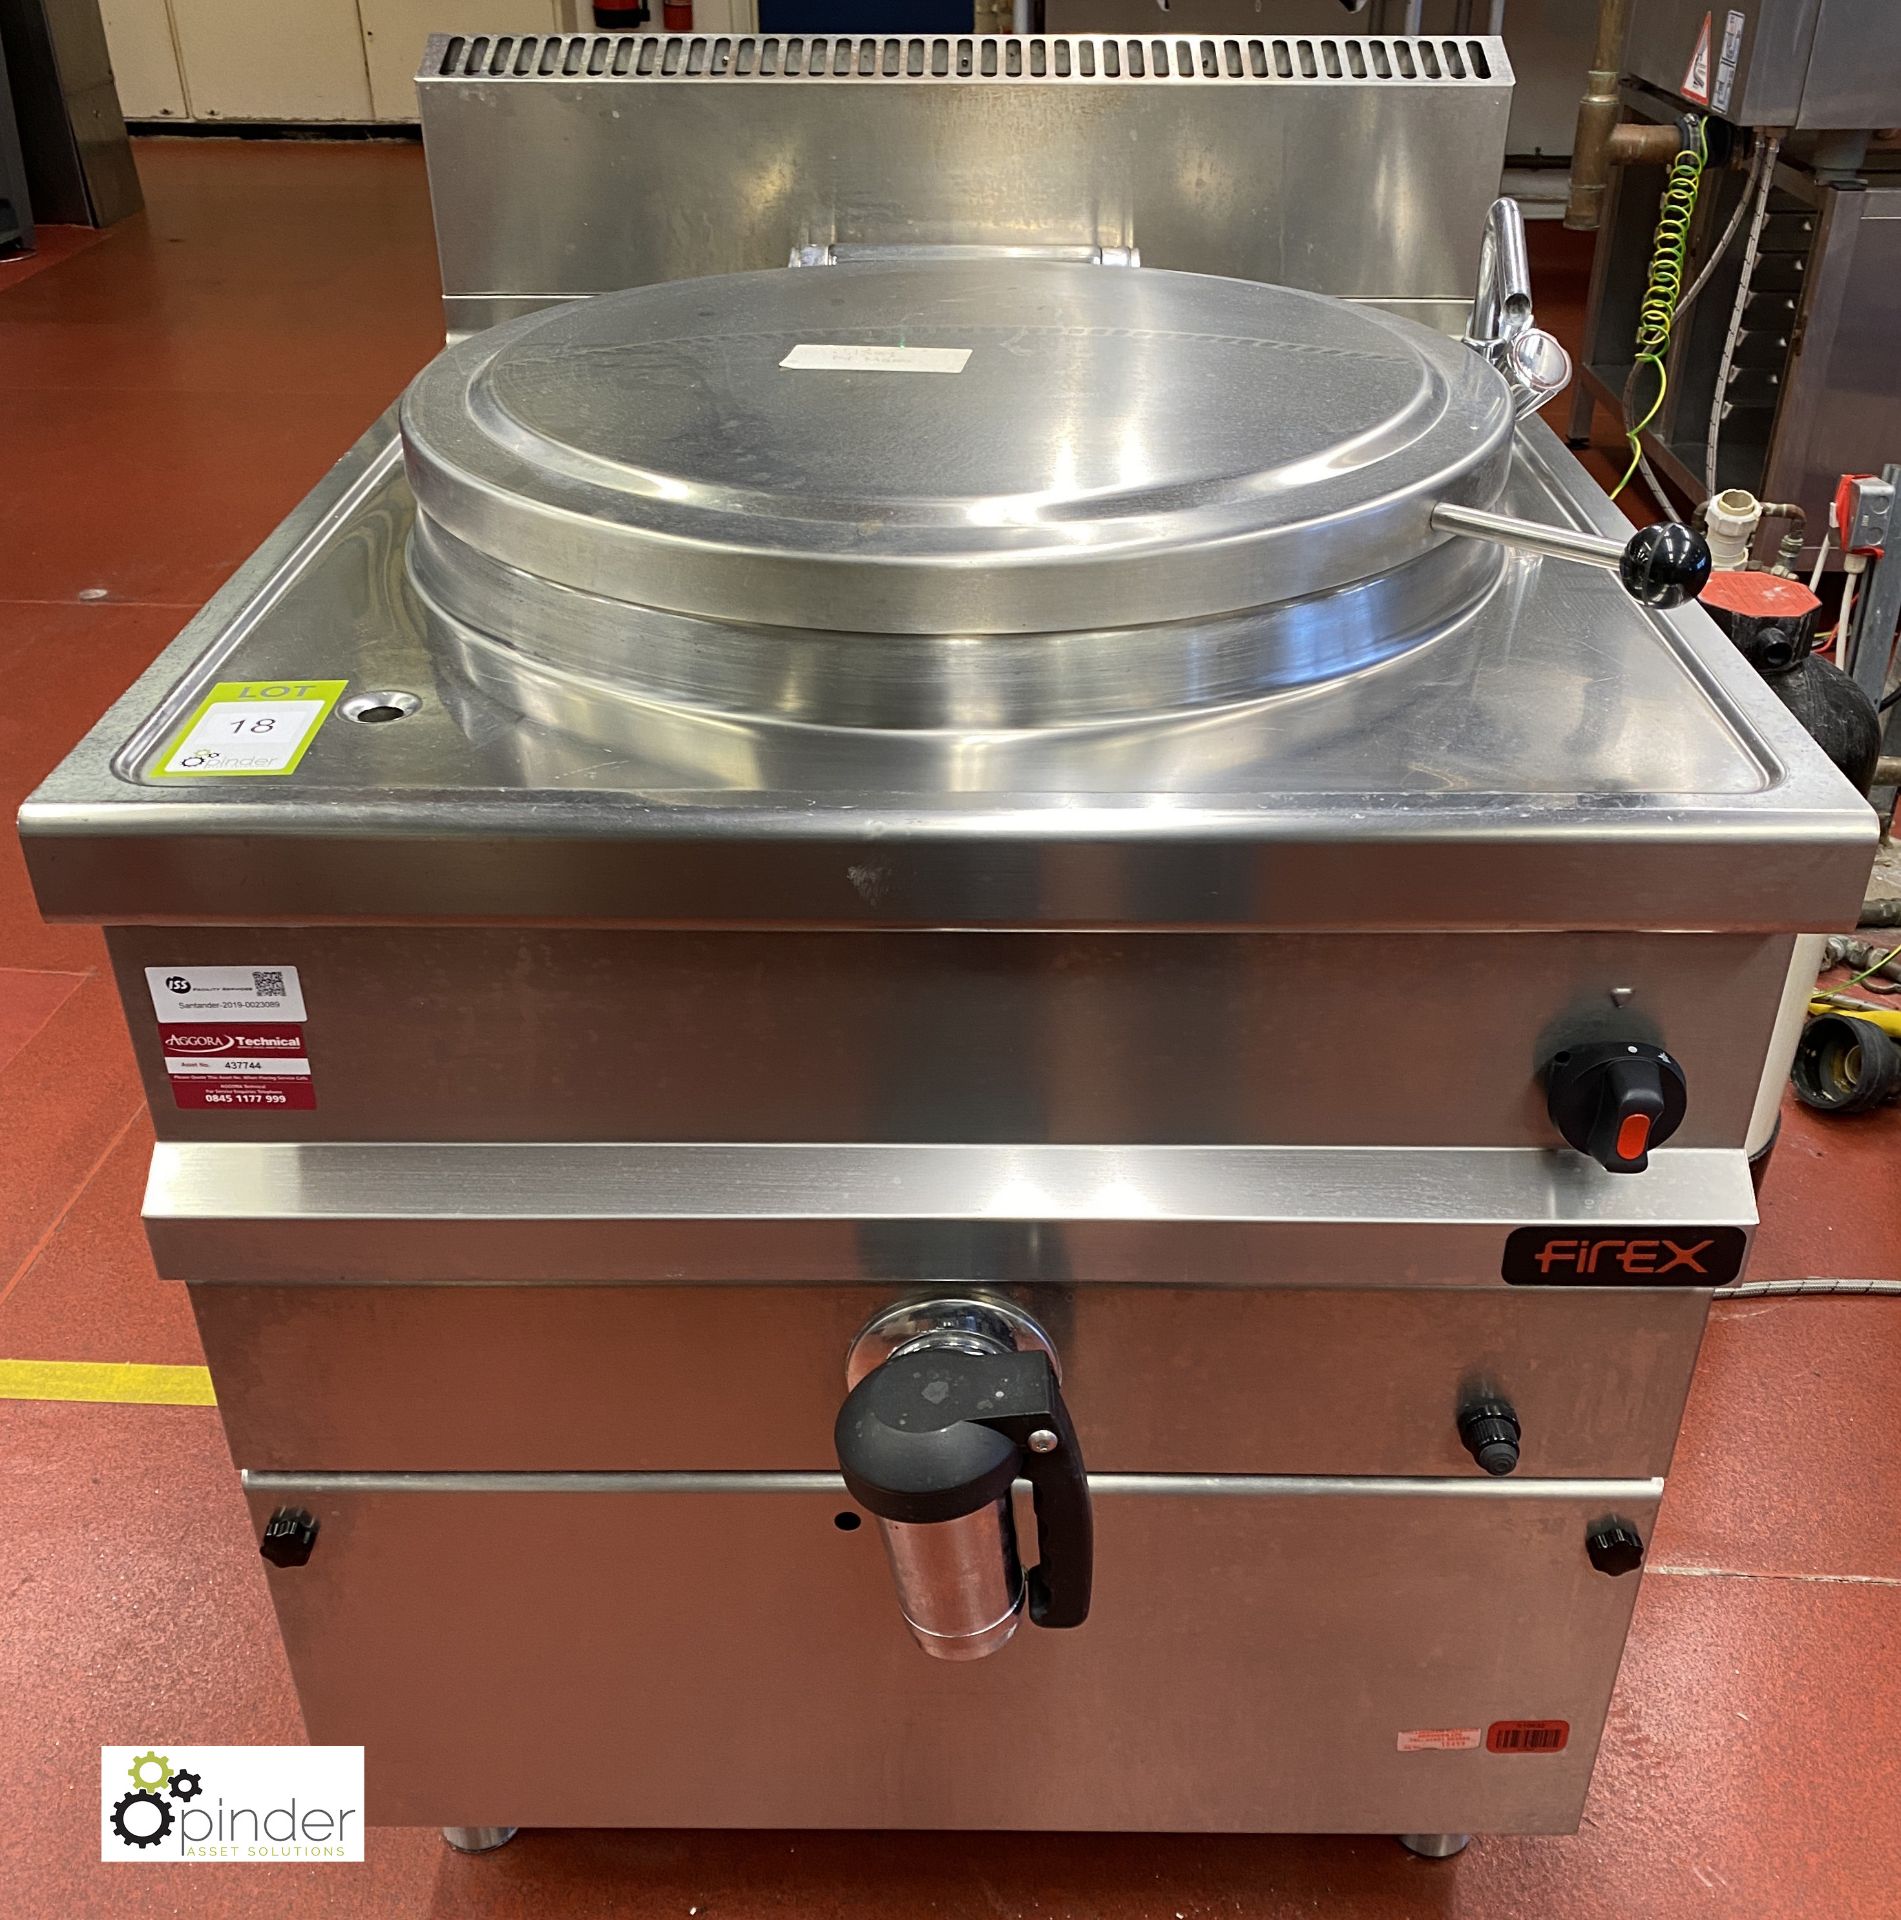 Firex stainless steel gas fired boiling Easypan, 800mm x 900mm x 1000mm (lot location – Parkview